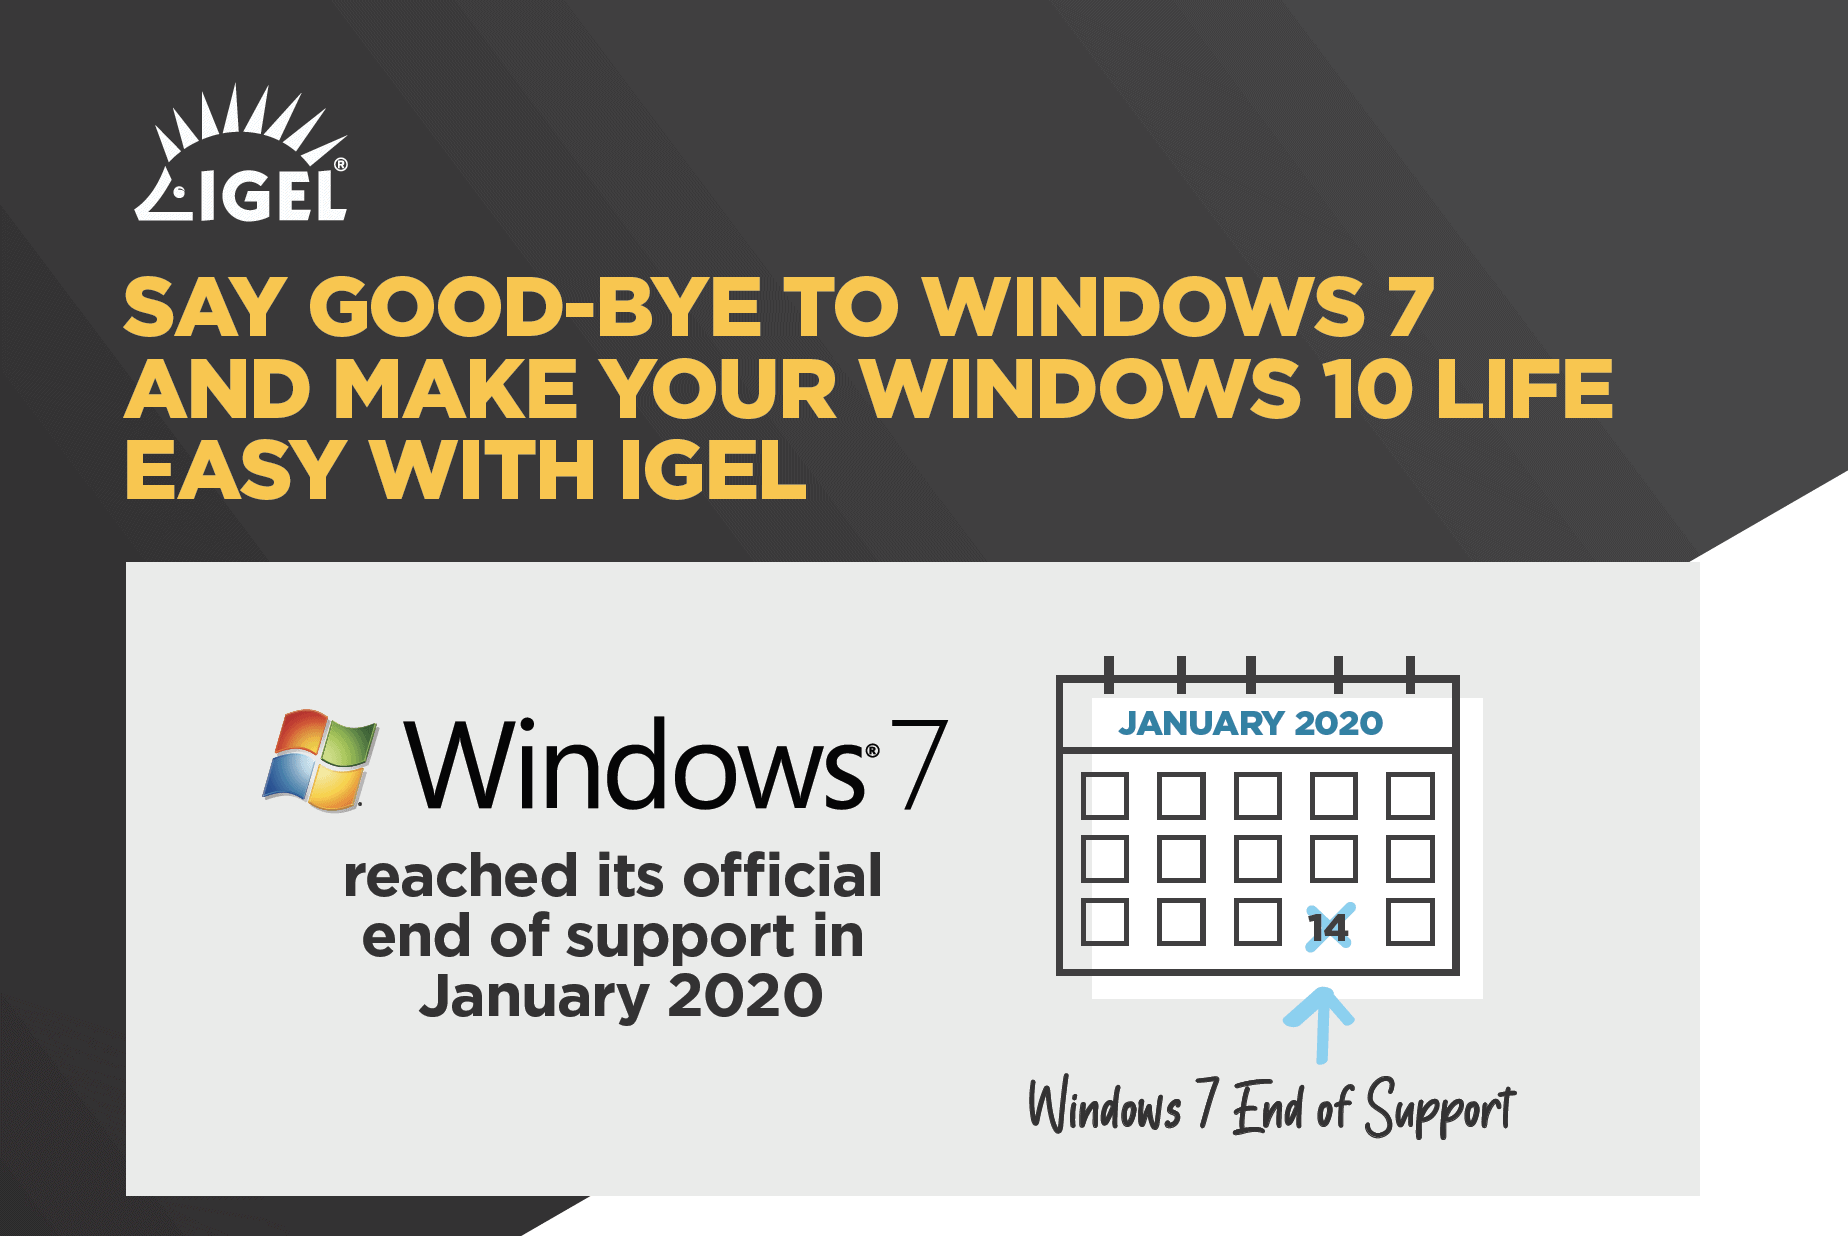 Say Good-bye to Windows 7 and Make Your Windows 10 Life Easy with IGEL